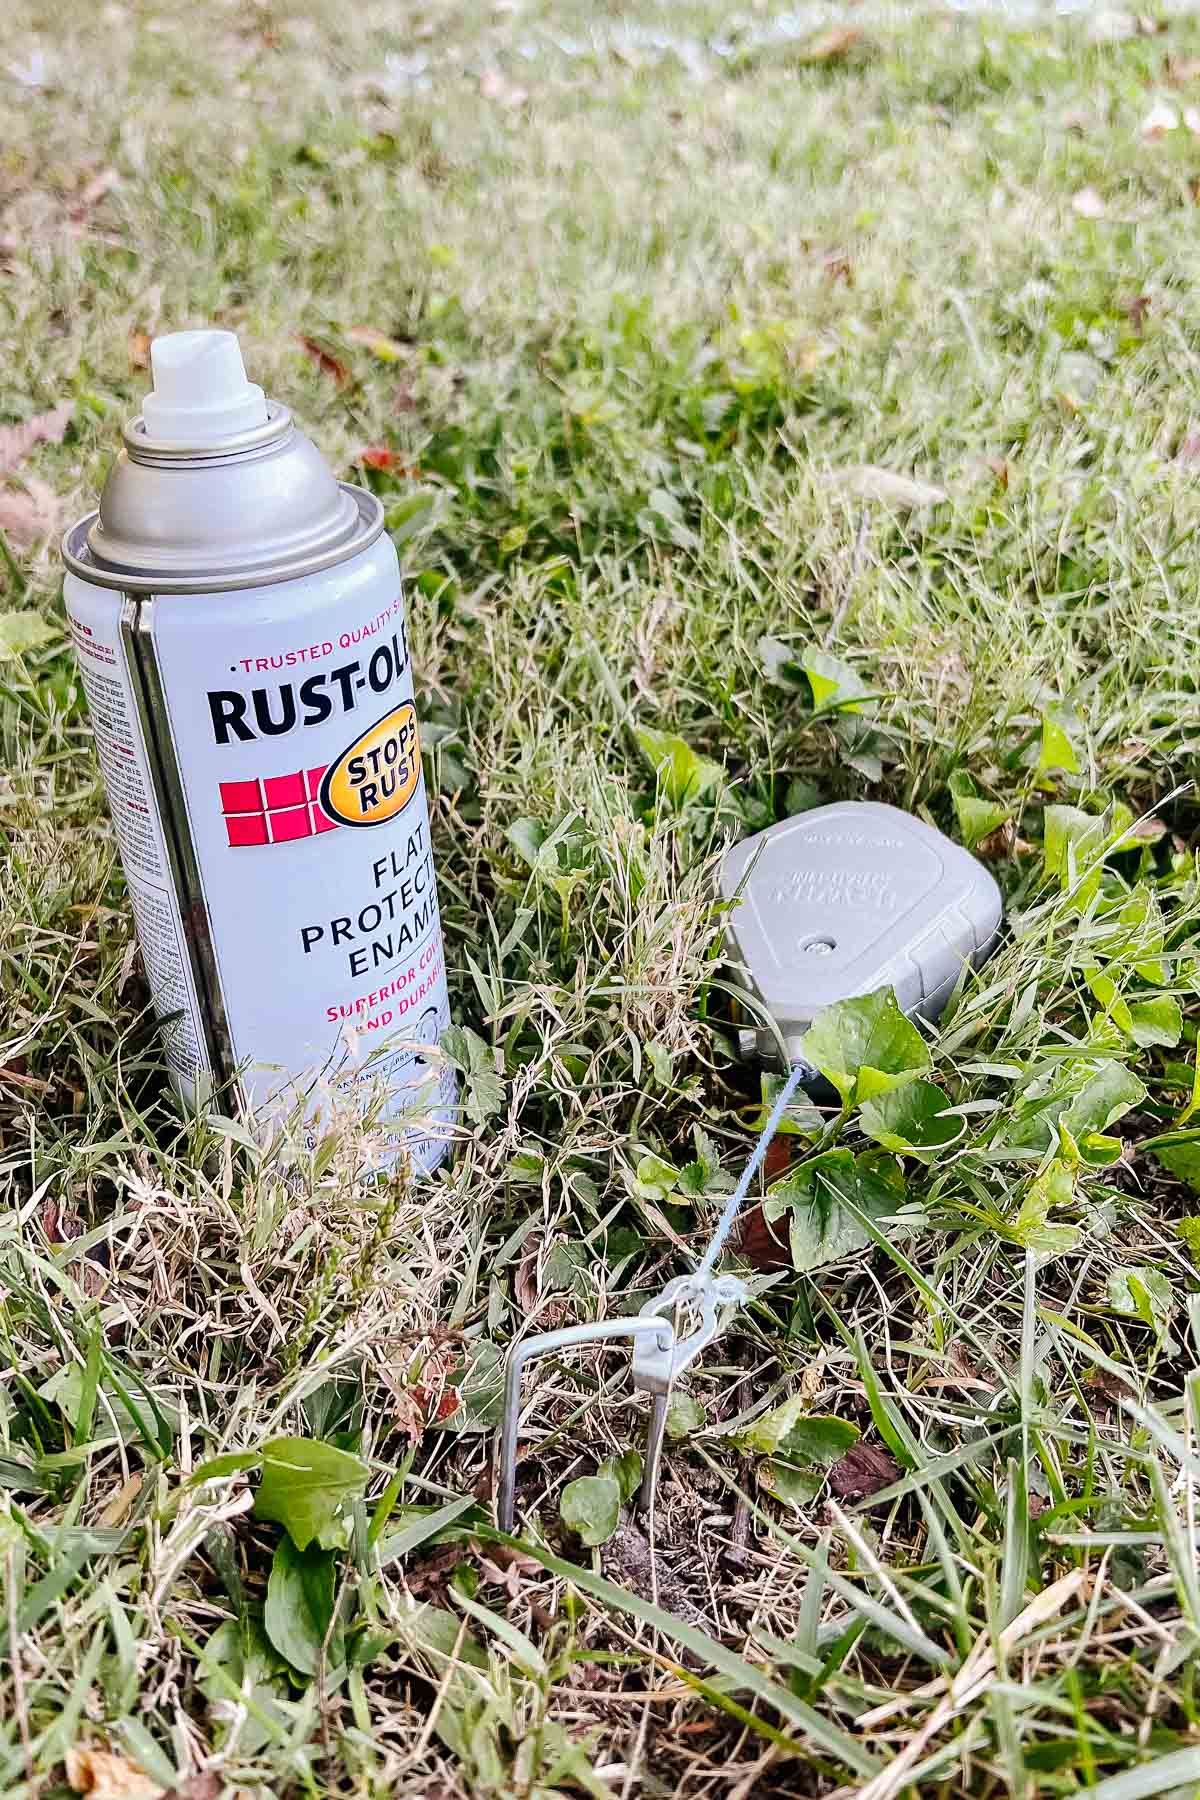 A can of spray paint on a grassy lawn